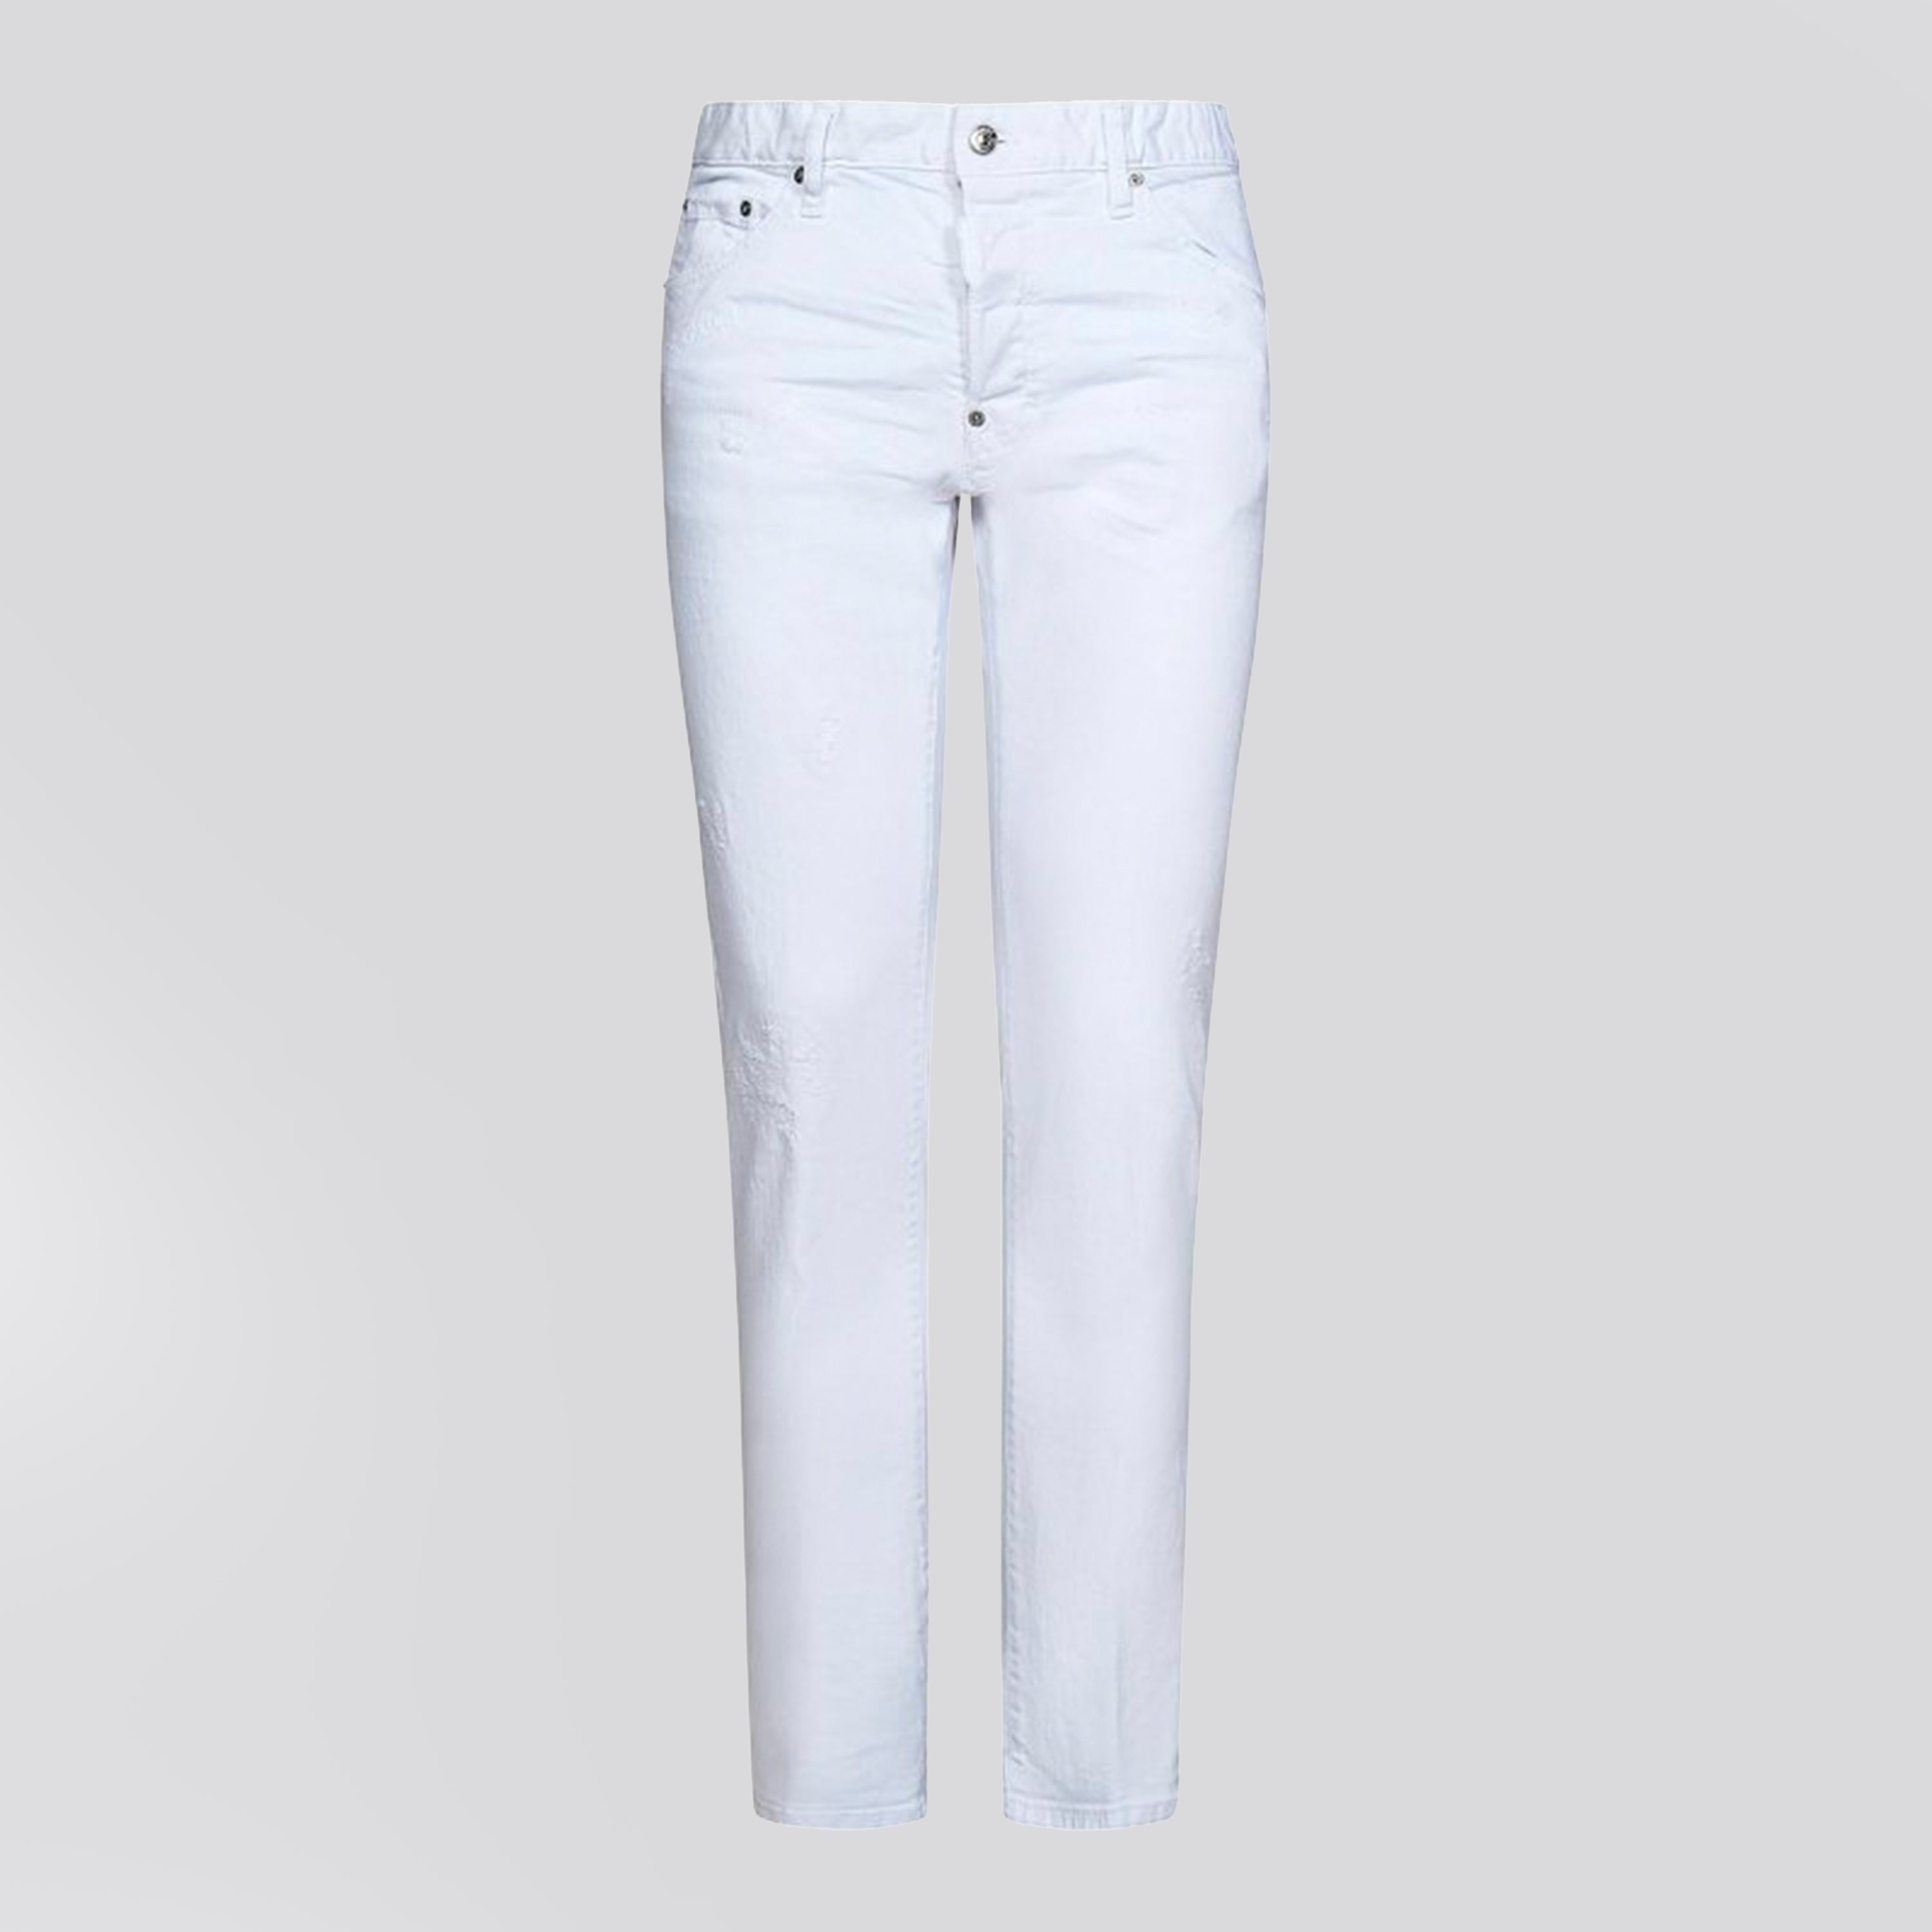 Jeans Blanco Dsquared2 Cool Guy White Bull